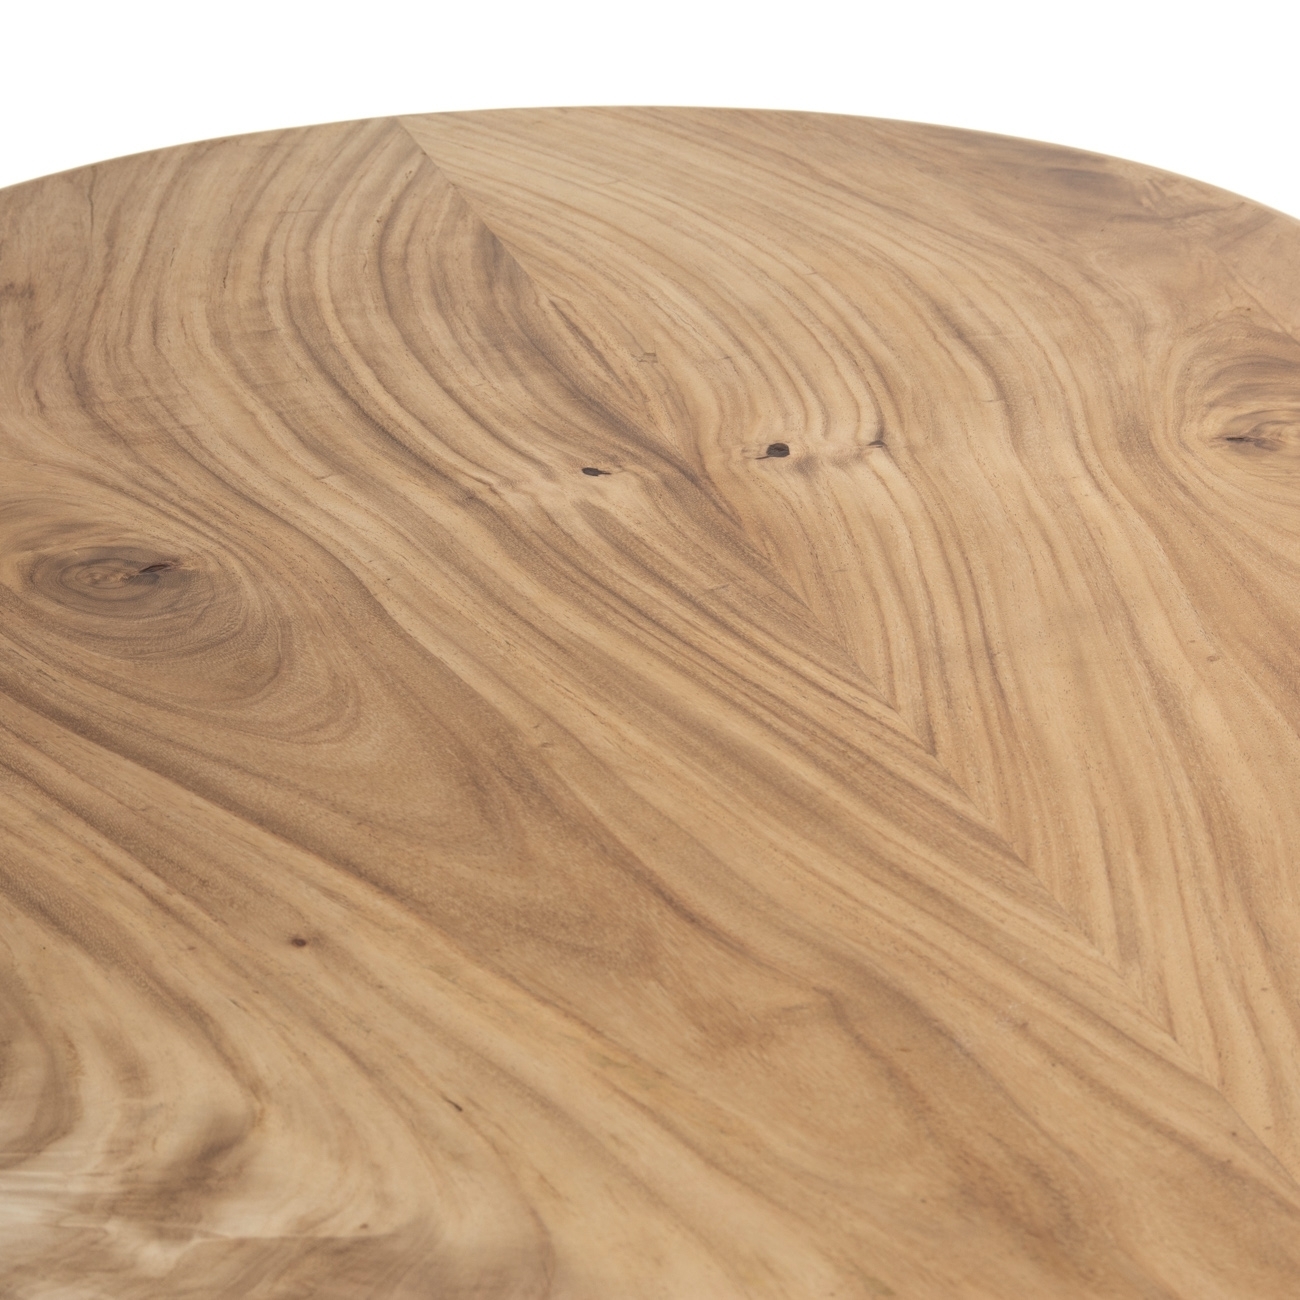 Nausica Oval Dining Table - Image 6